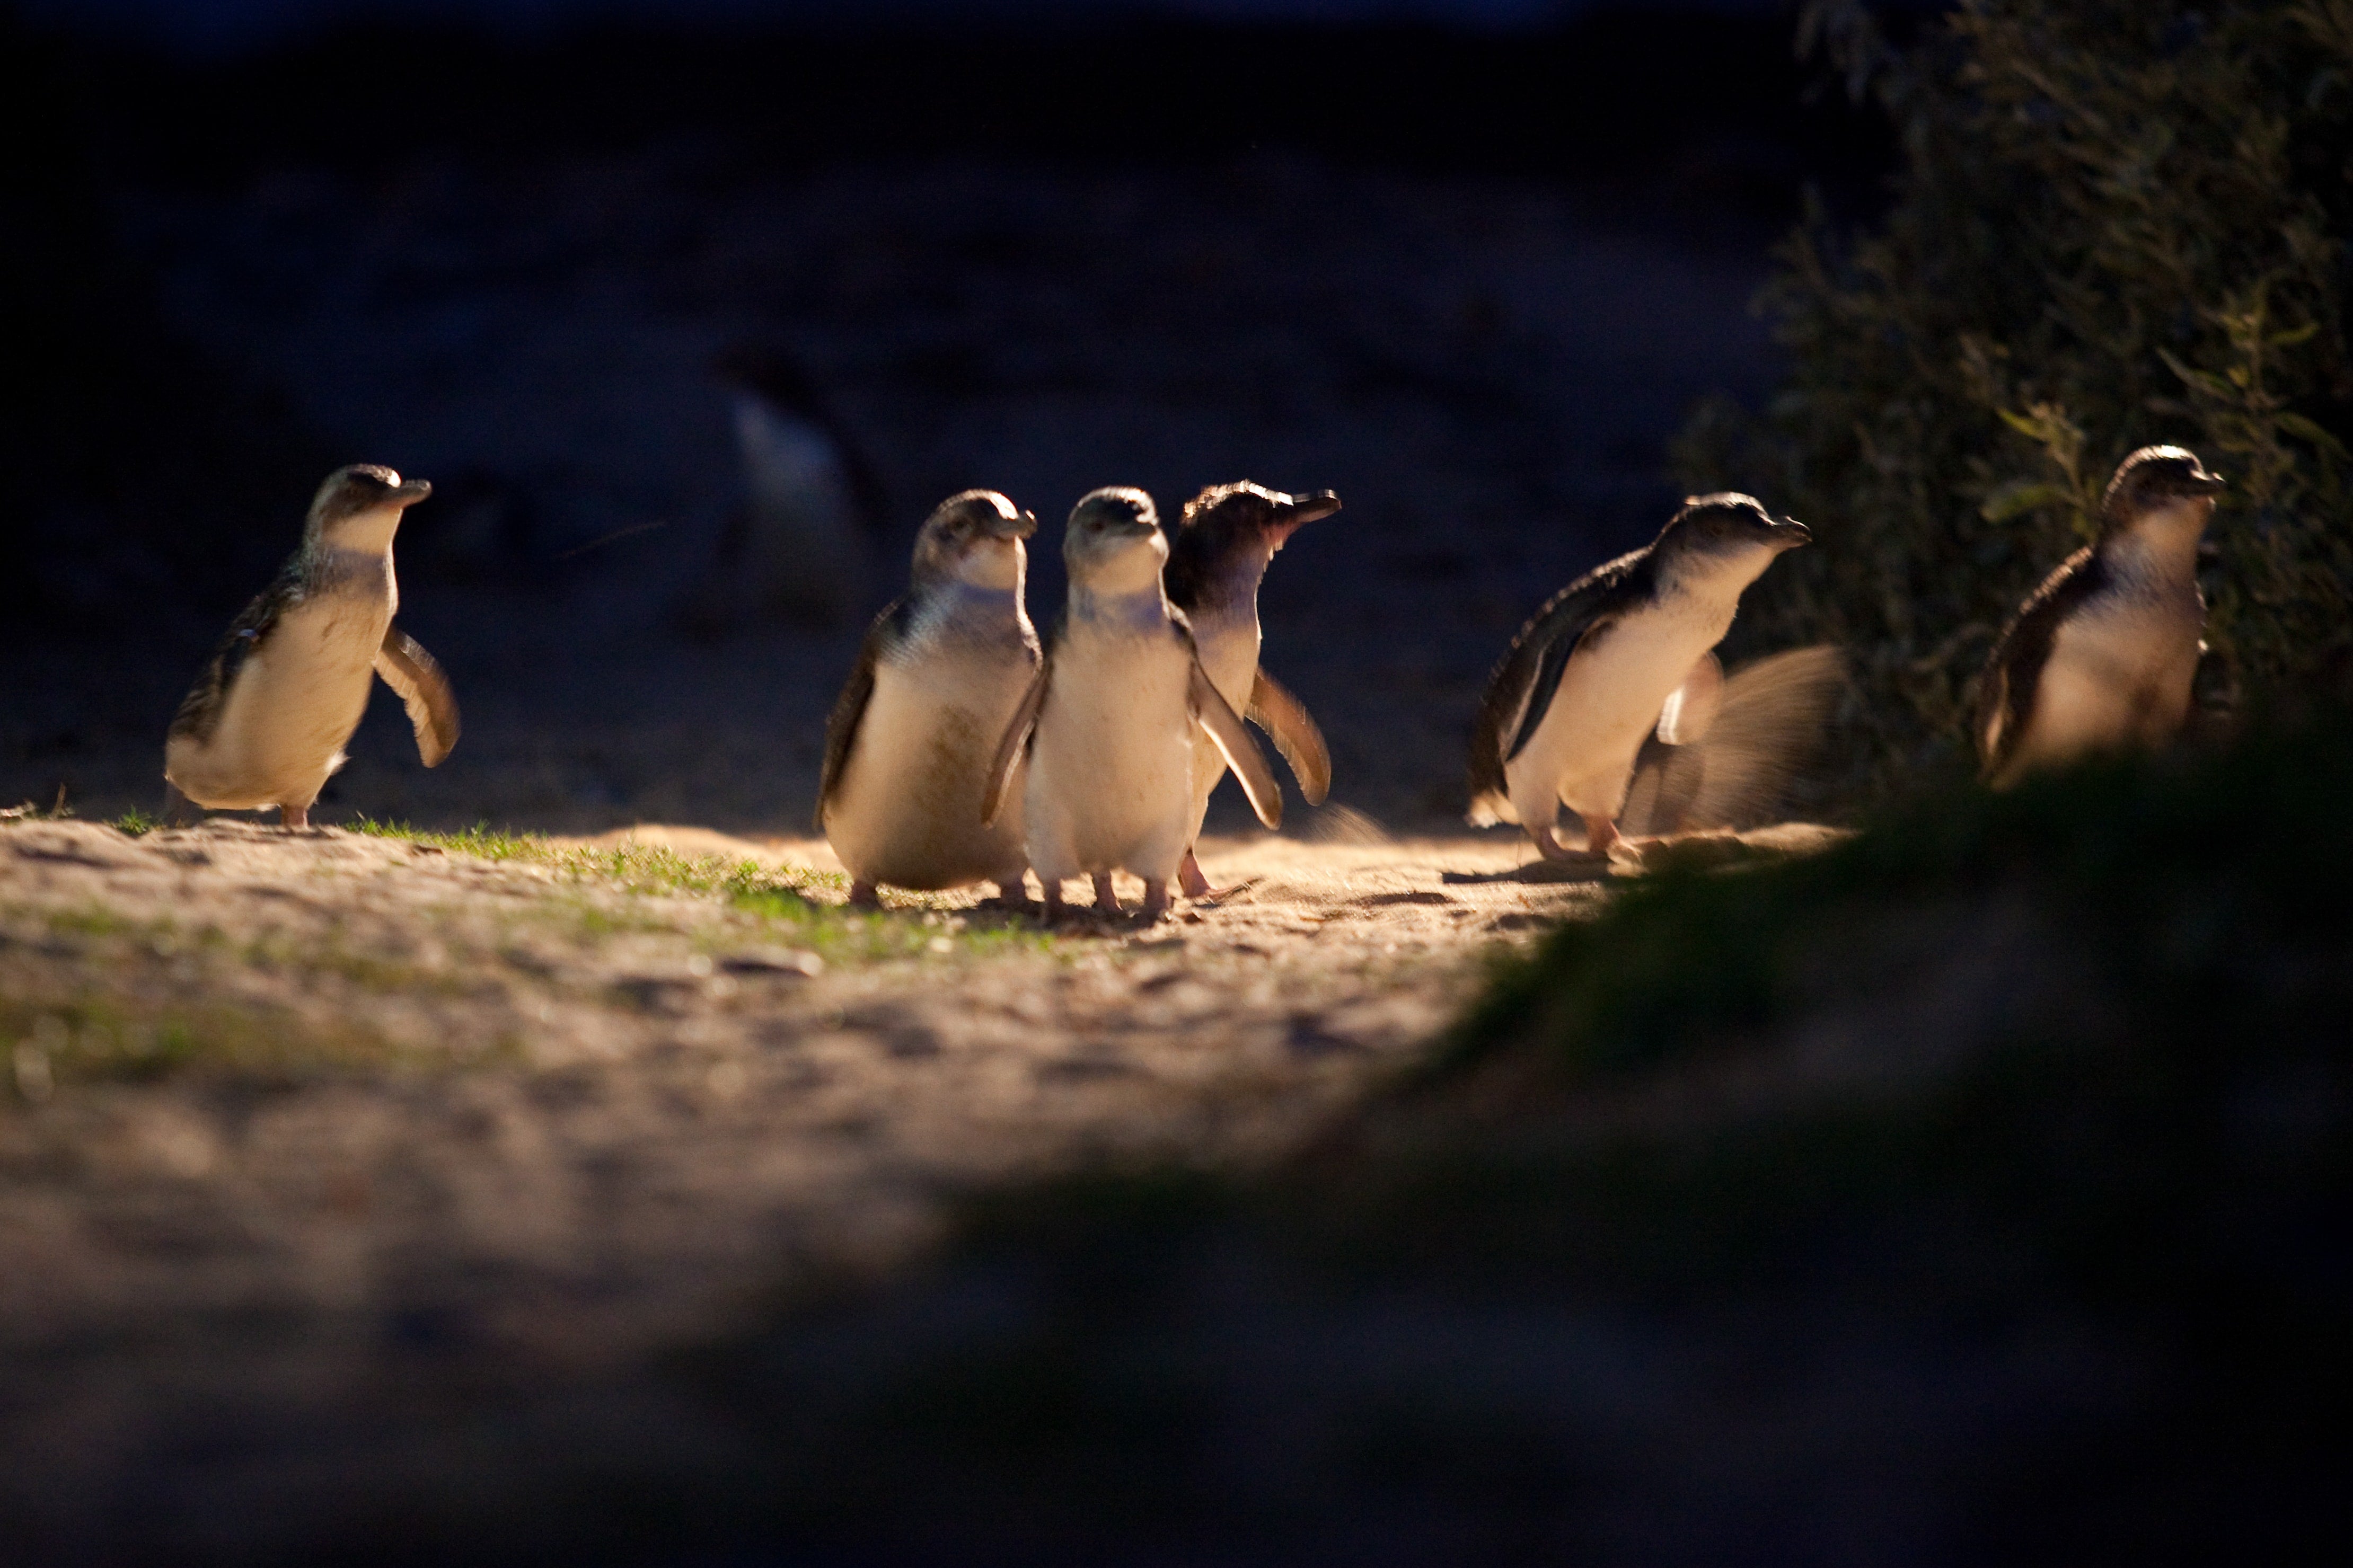 The penguins arrive on Phillip Island every night after sunset